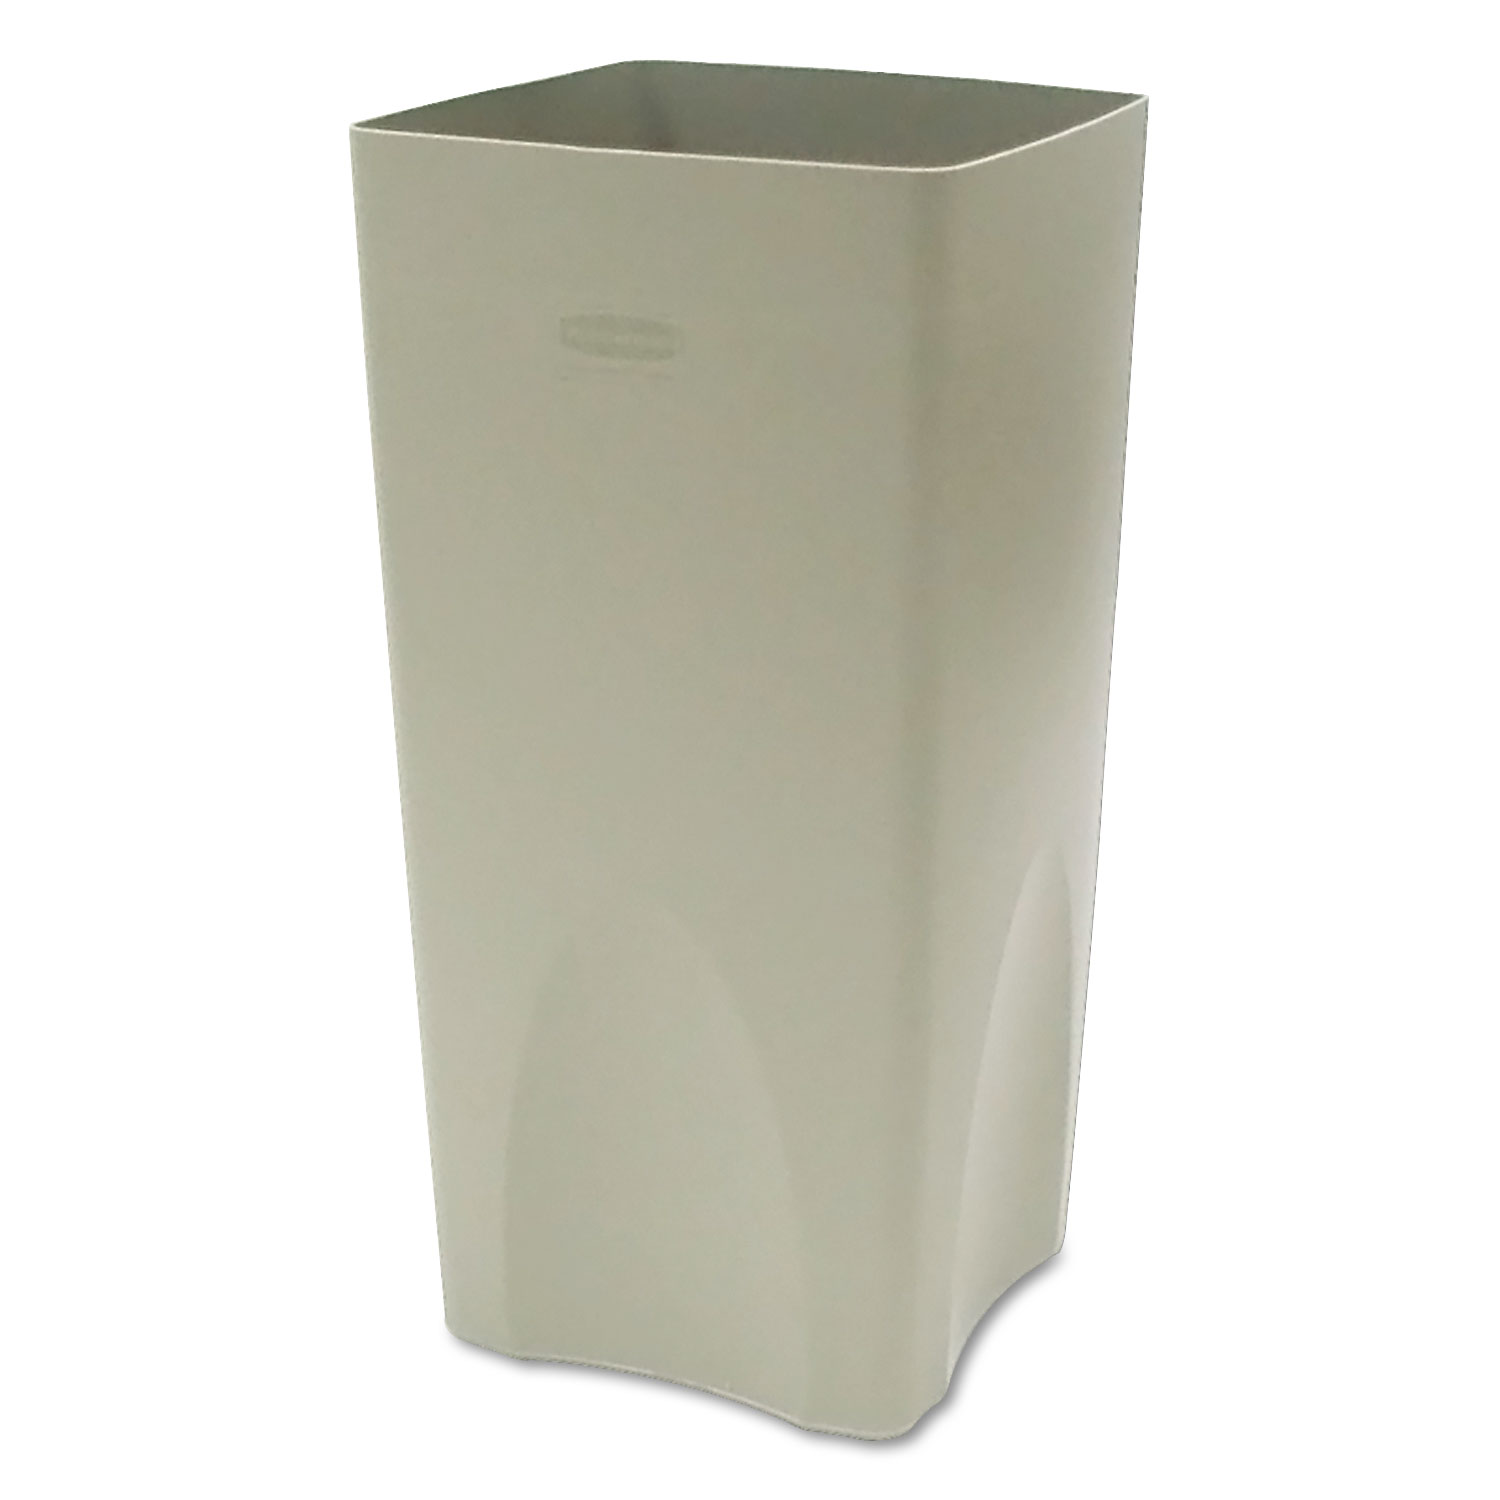  Rubbermaid Commercial FG356300BEIG Plaza Waste Container Rigid Liner, Square, Plastic, 19 gal, Beige (RCP356300BGCT) 